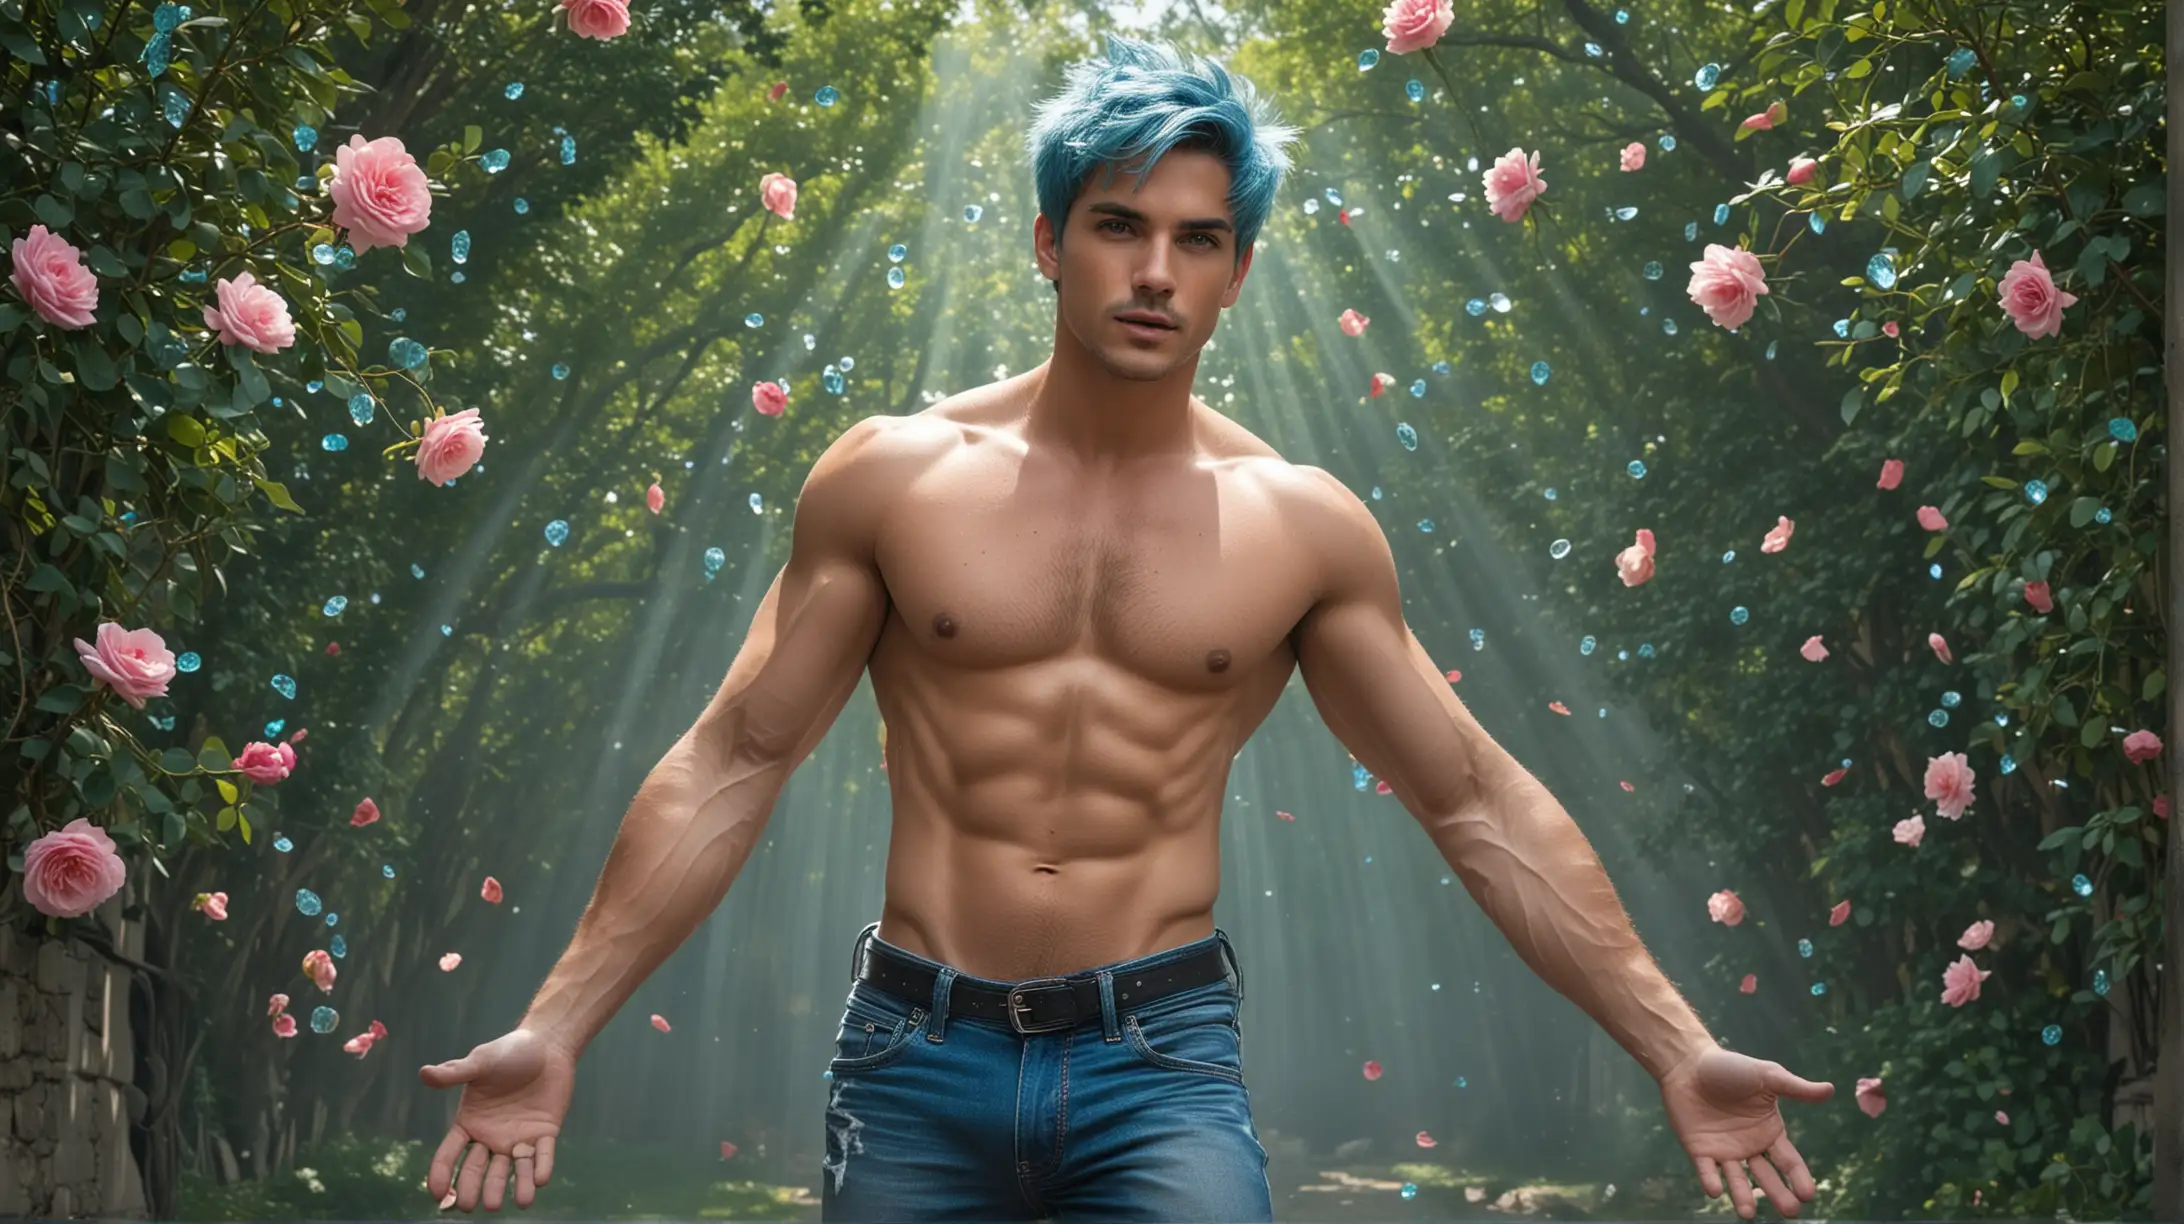 In a breathtaking display of power and transformation, a shirtless hunk with mesmerizing aquamarine eyes and short navy blue hair leaps into the air. His rugged 5 o'clock shadow adds to his rugged charm as he defies gravity, suspended in mid-air. Clad only in casual jeans, his open pink shirt hangs in tatters, fluttering around him like a banner in the wind. As he ascends, a brilliant aquamarine aura radiates from the circular energy crystal embedded in the center of his chest. The crystal pulses with energy, casting a dazzling glow that illuminates the surrounding rose garden.